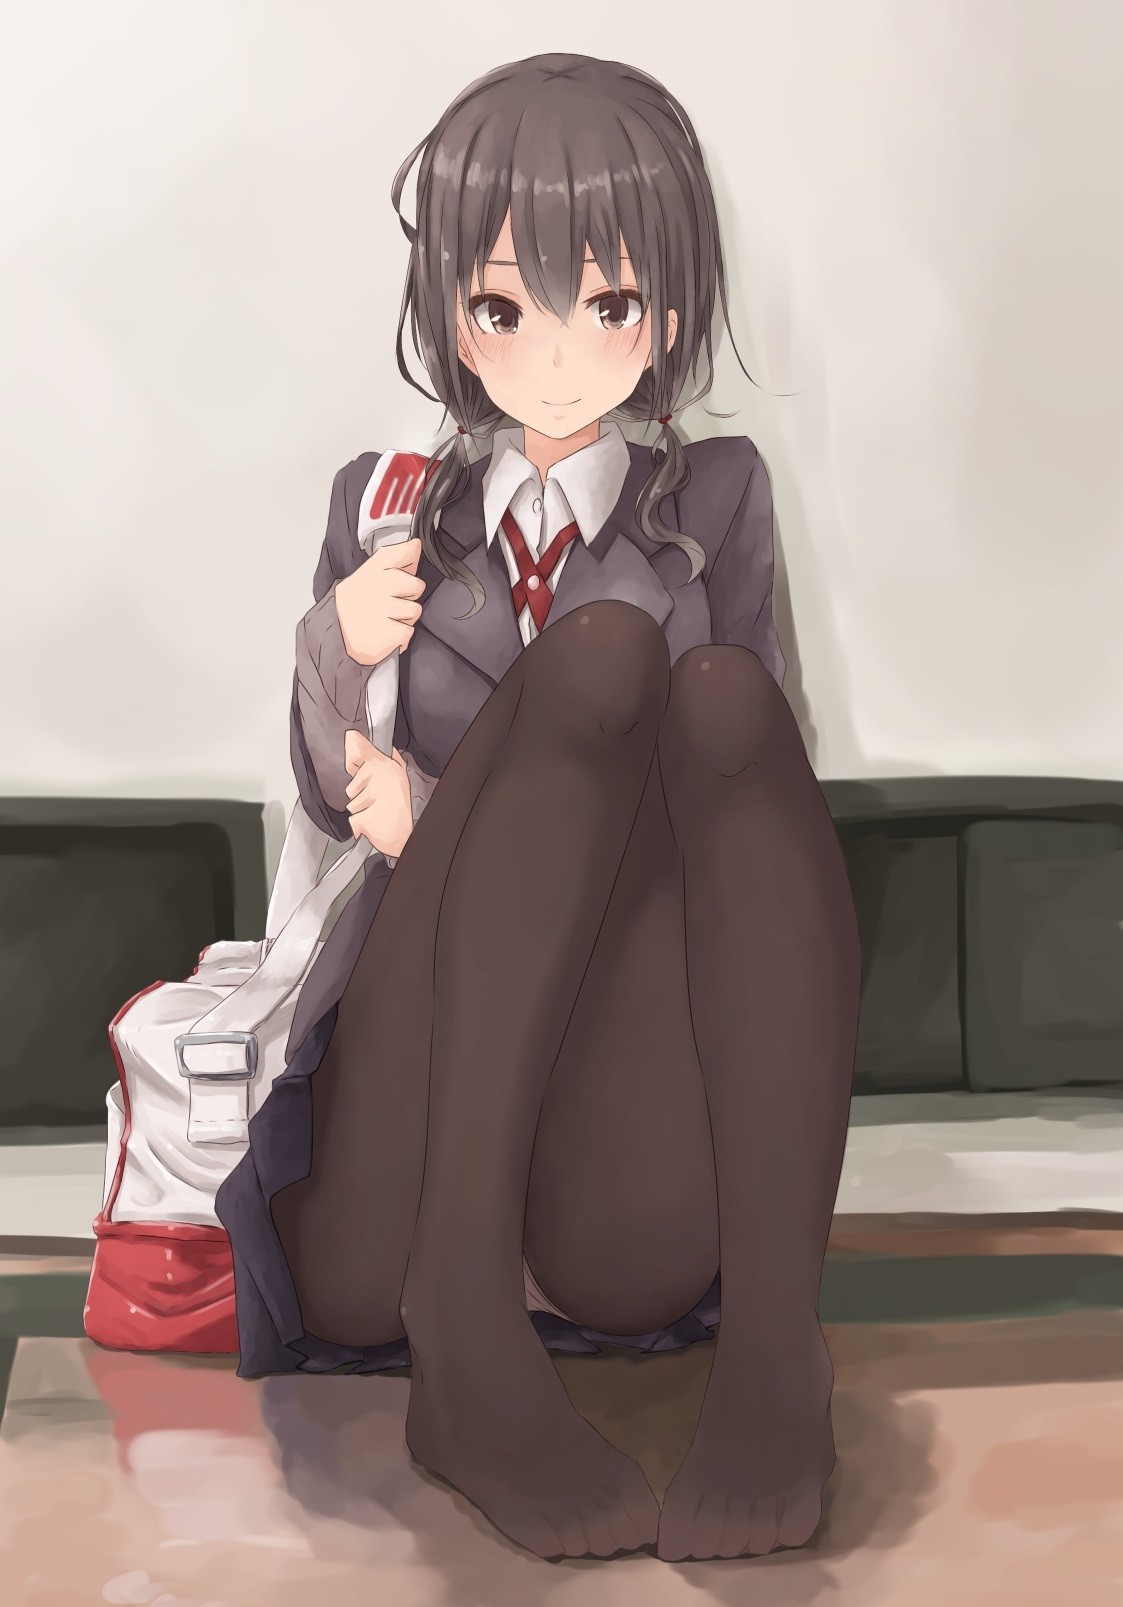 Anime 1123x1607 anime anime girls feet long hair pantyhose knees together Pixiv women indoors indoors smiling brunette sitting on the floor looking at viewer